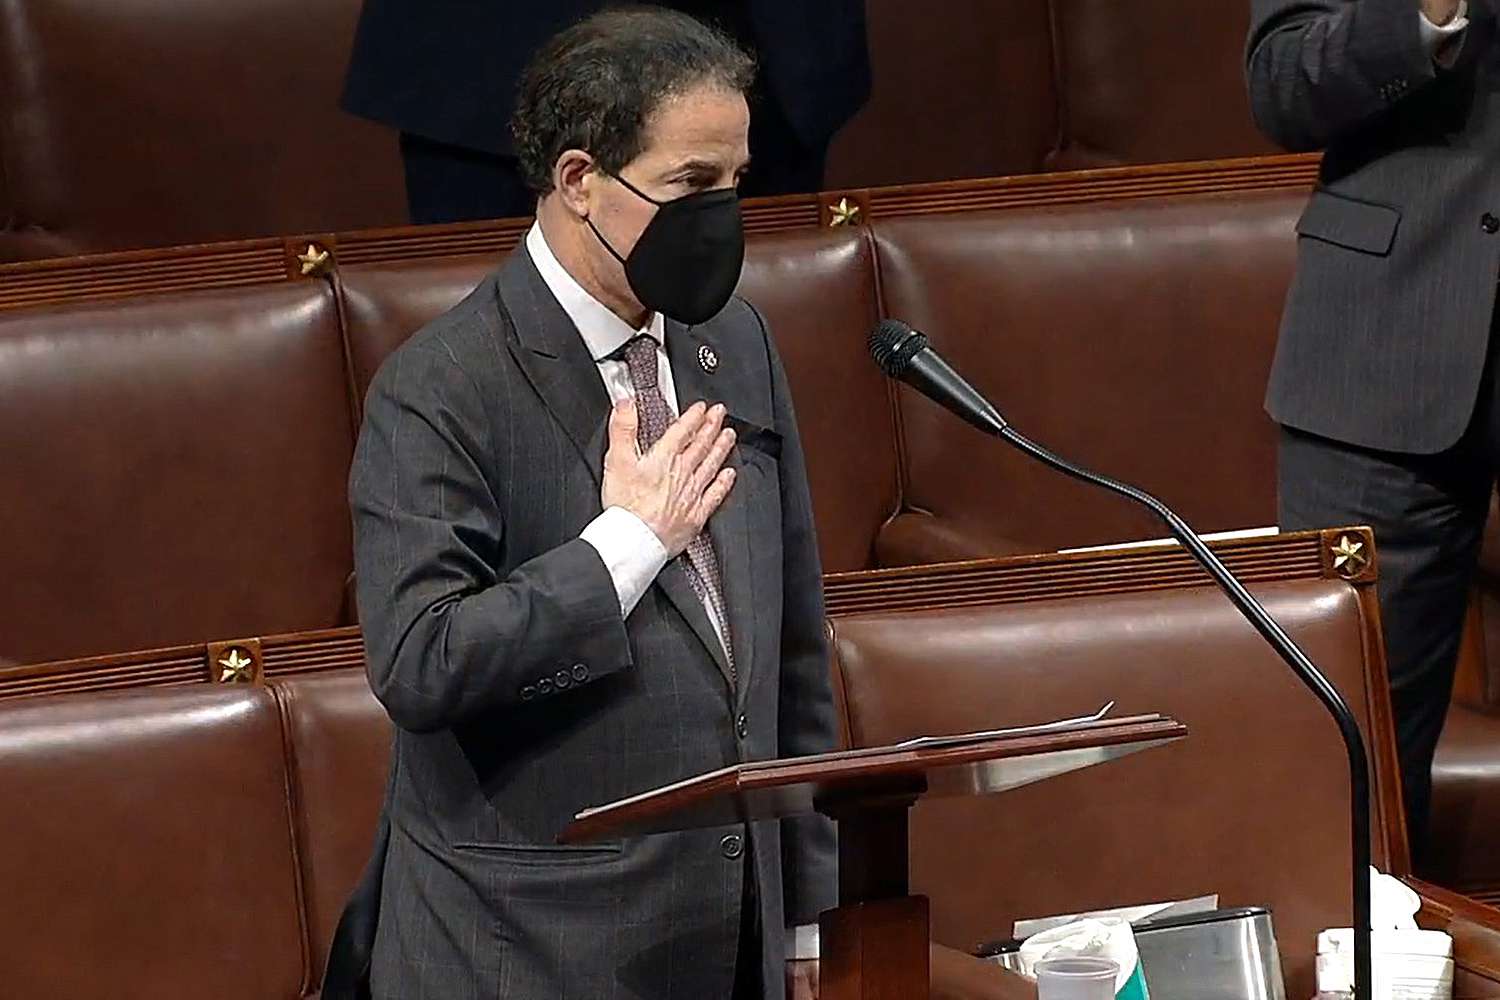 Rep. Jamie Raskin Gets Supportive Ovation After Son's ...